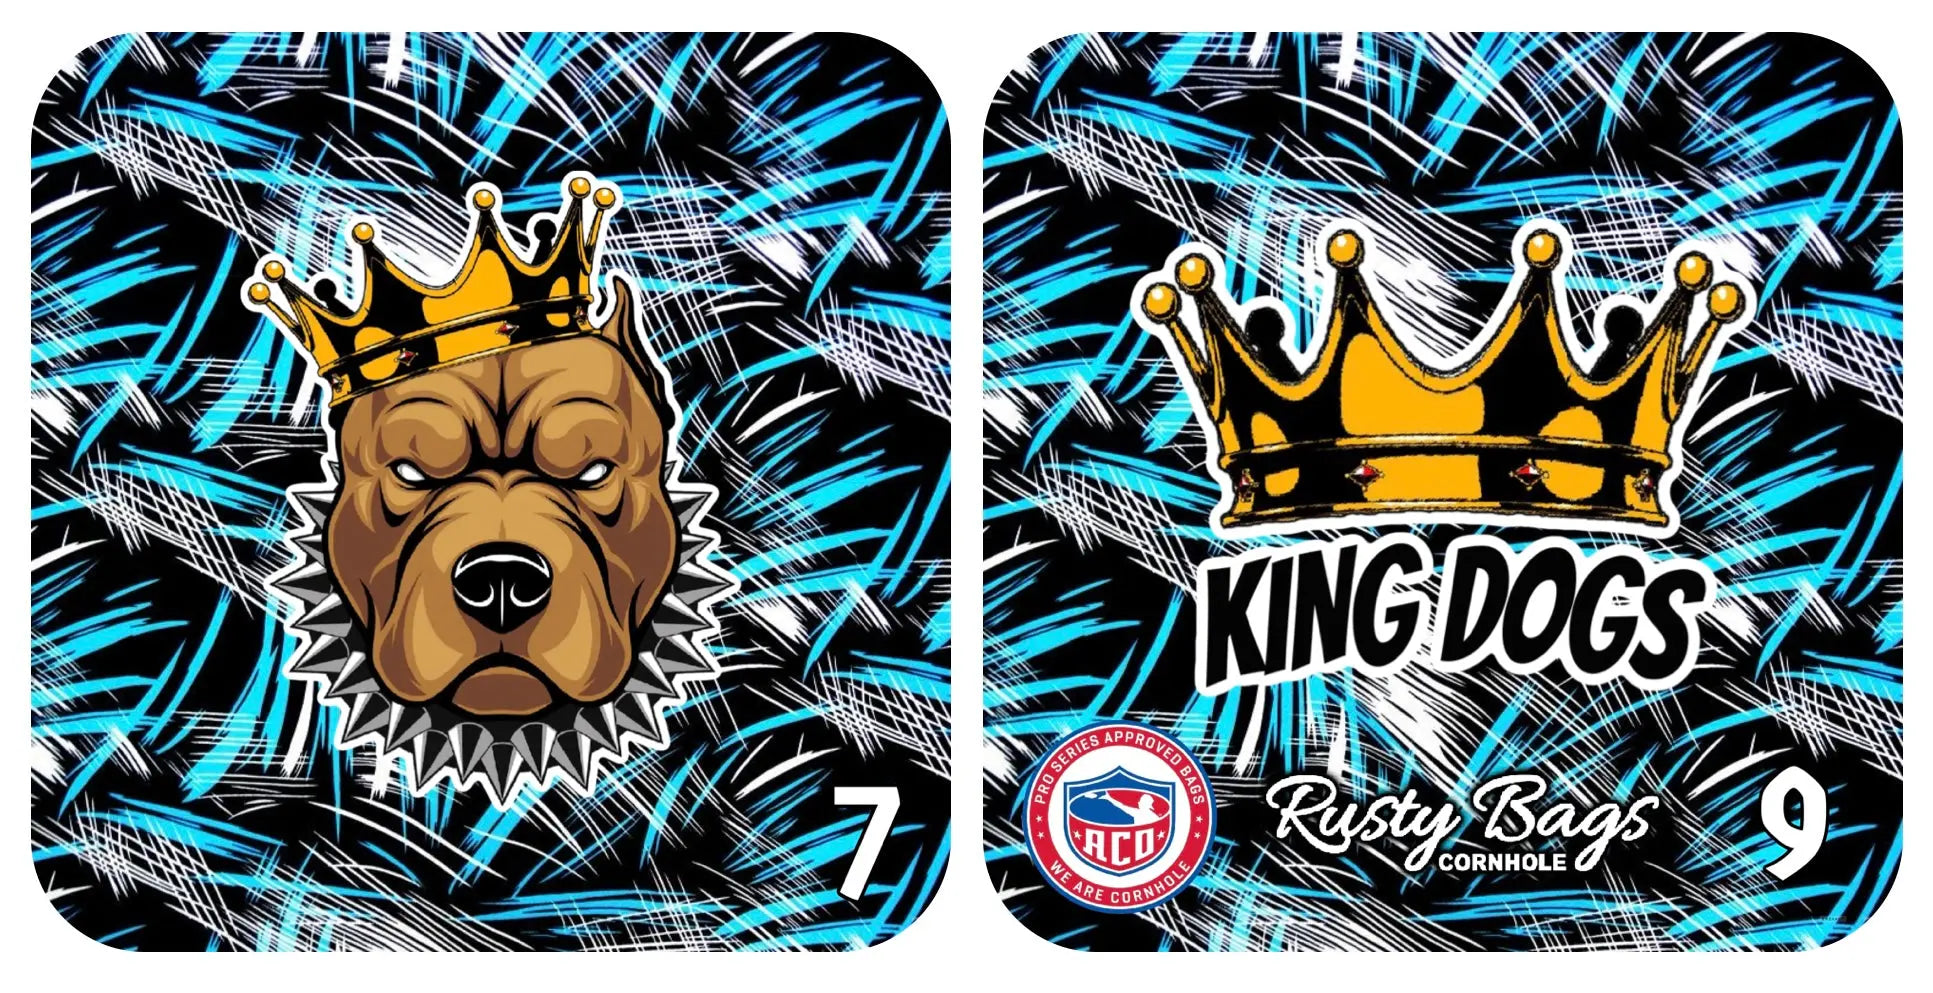 KING DOGS - BLUE FIREWORK- ACO STAMPED - Pro Cornhole Bags 3 KT Cornhole Wraps and Boards